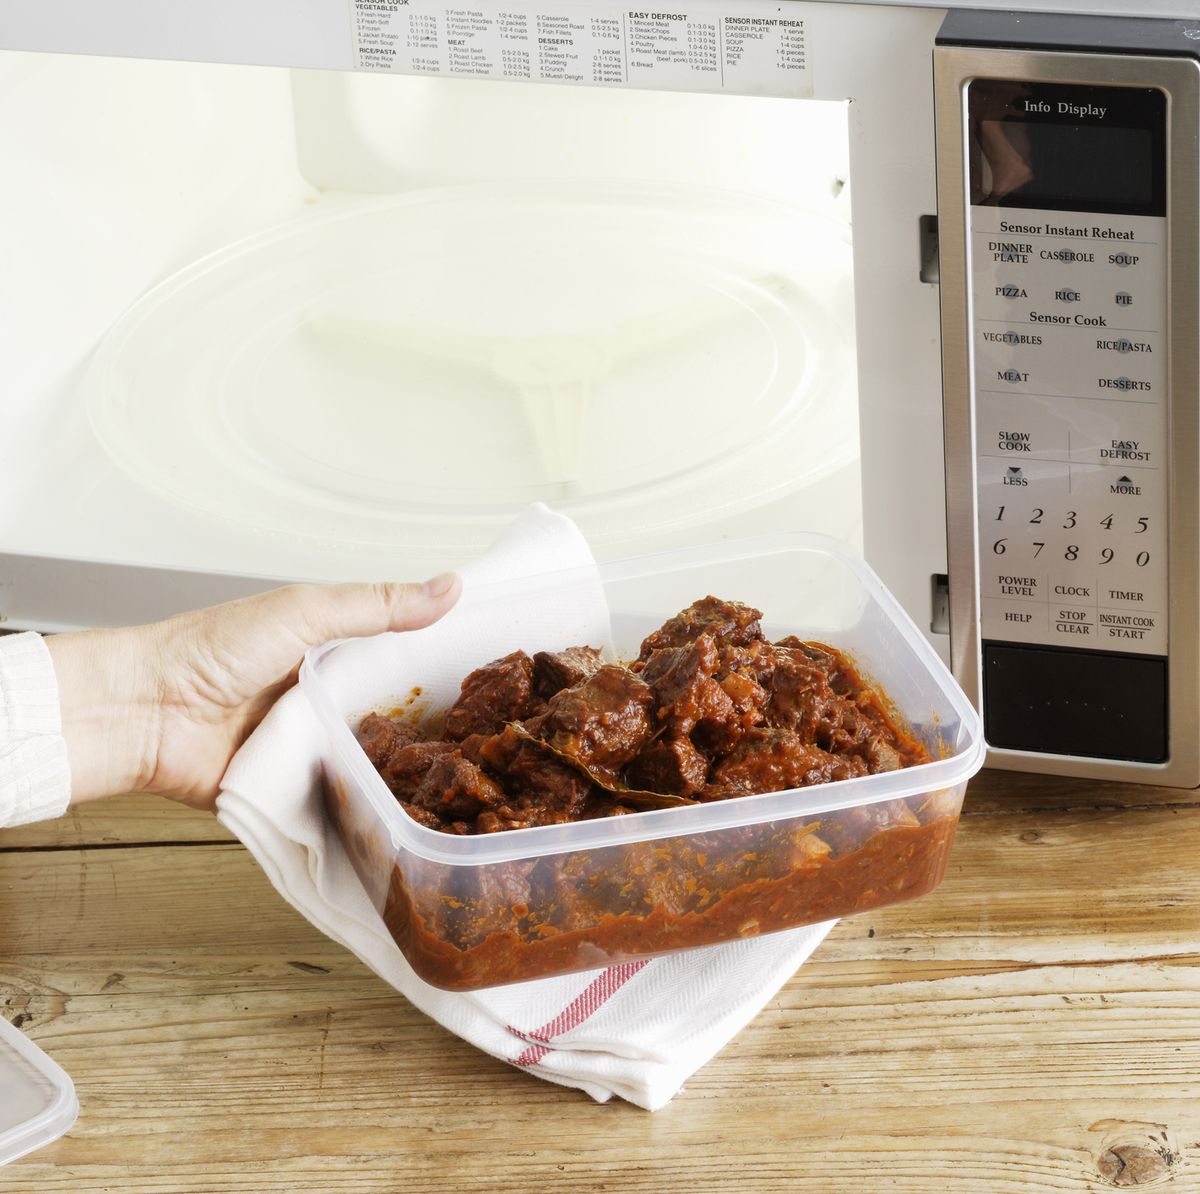 How to Dispose of a Microwave Oven? Quick and Easy Methods